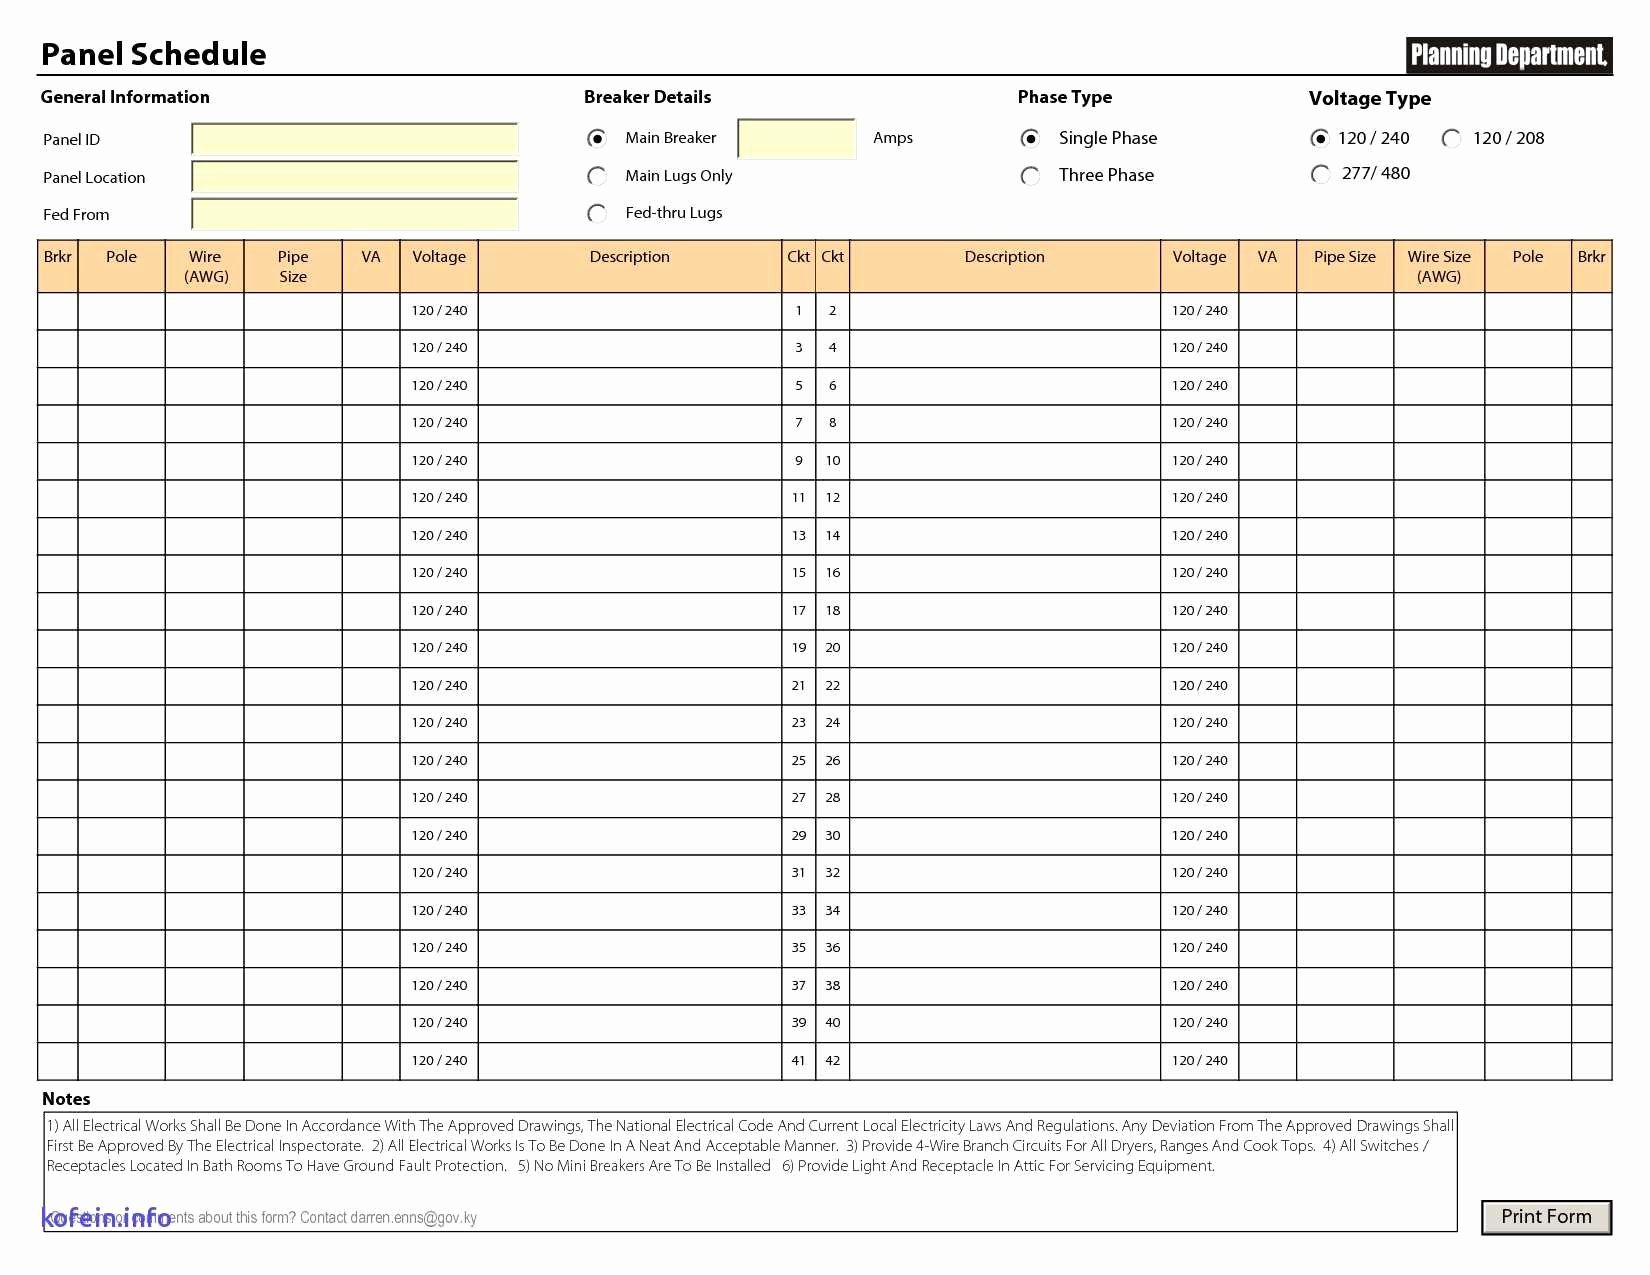 Electrical Panel Schedule Excel Luxury Electrical Panel Schedule Template Excel